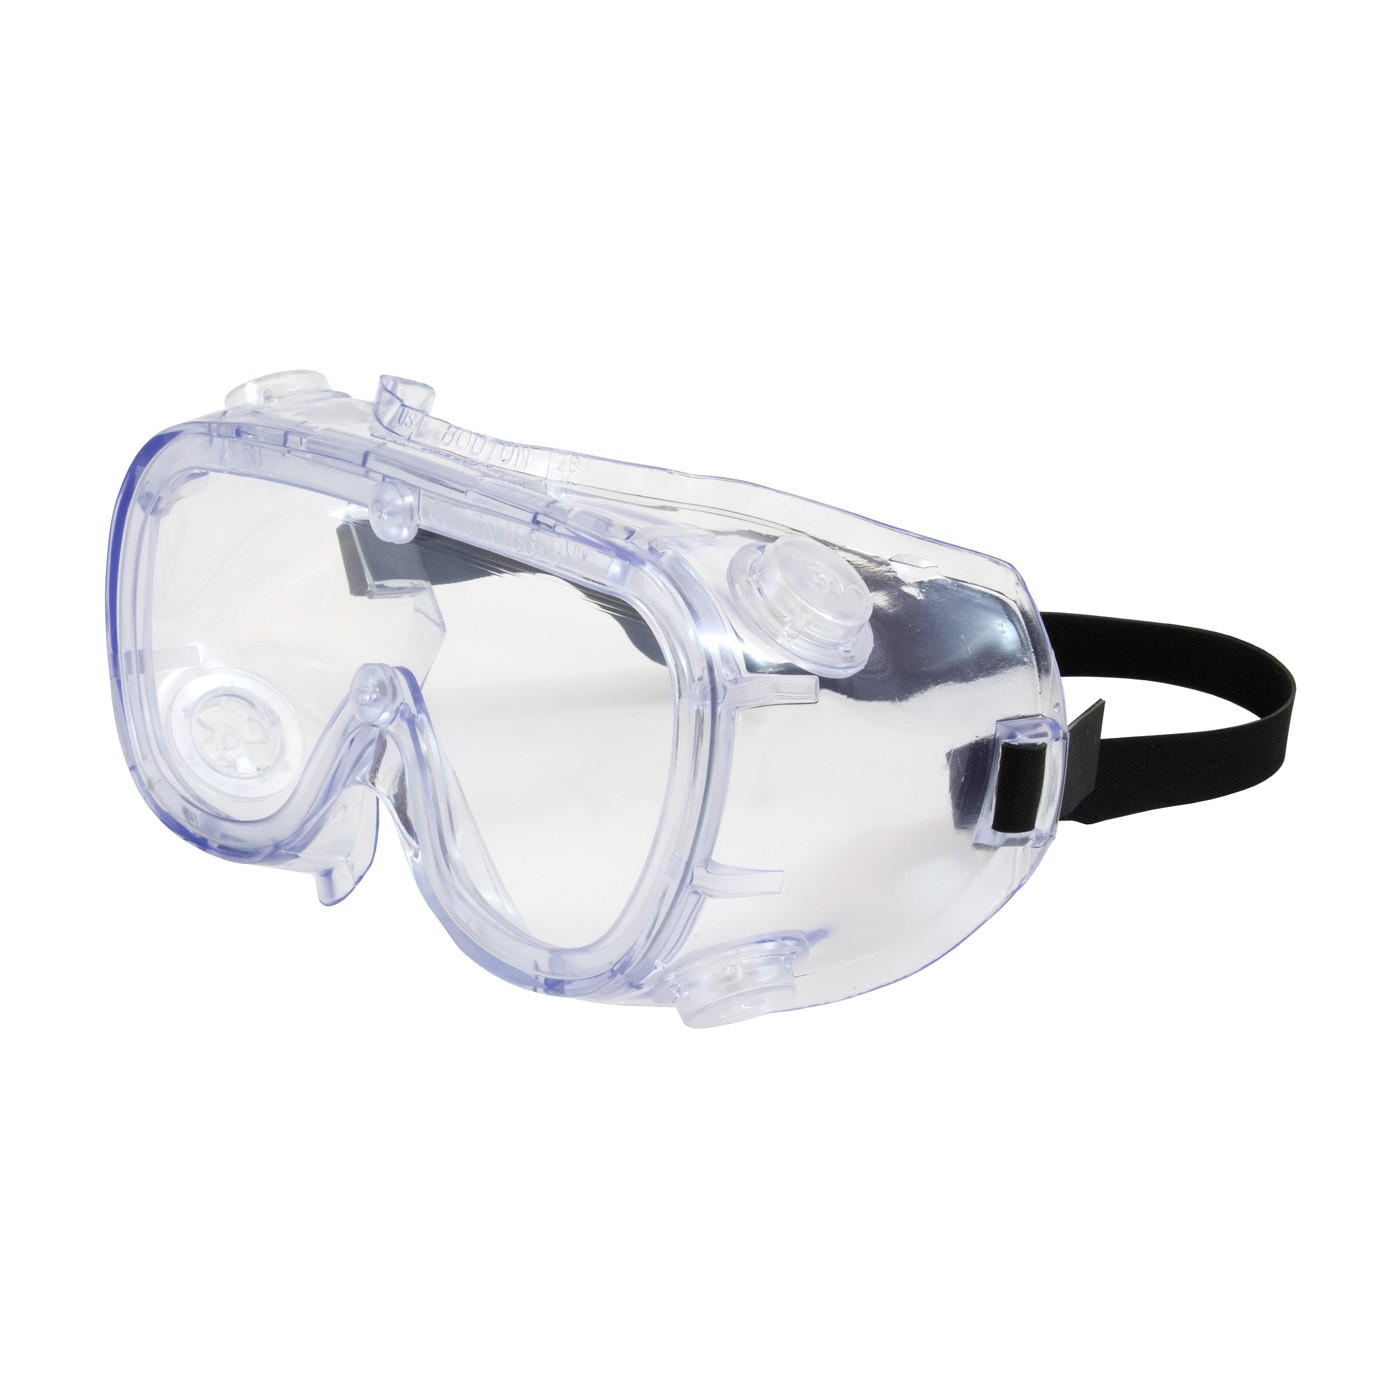 551 Softsides Goggle, IV, Clr Lens Clear Bl Frm, Elastic Strap, AS